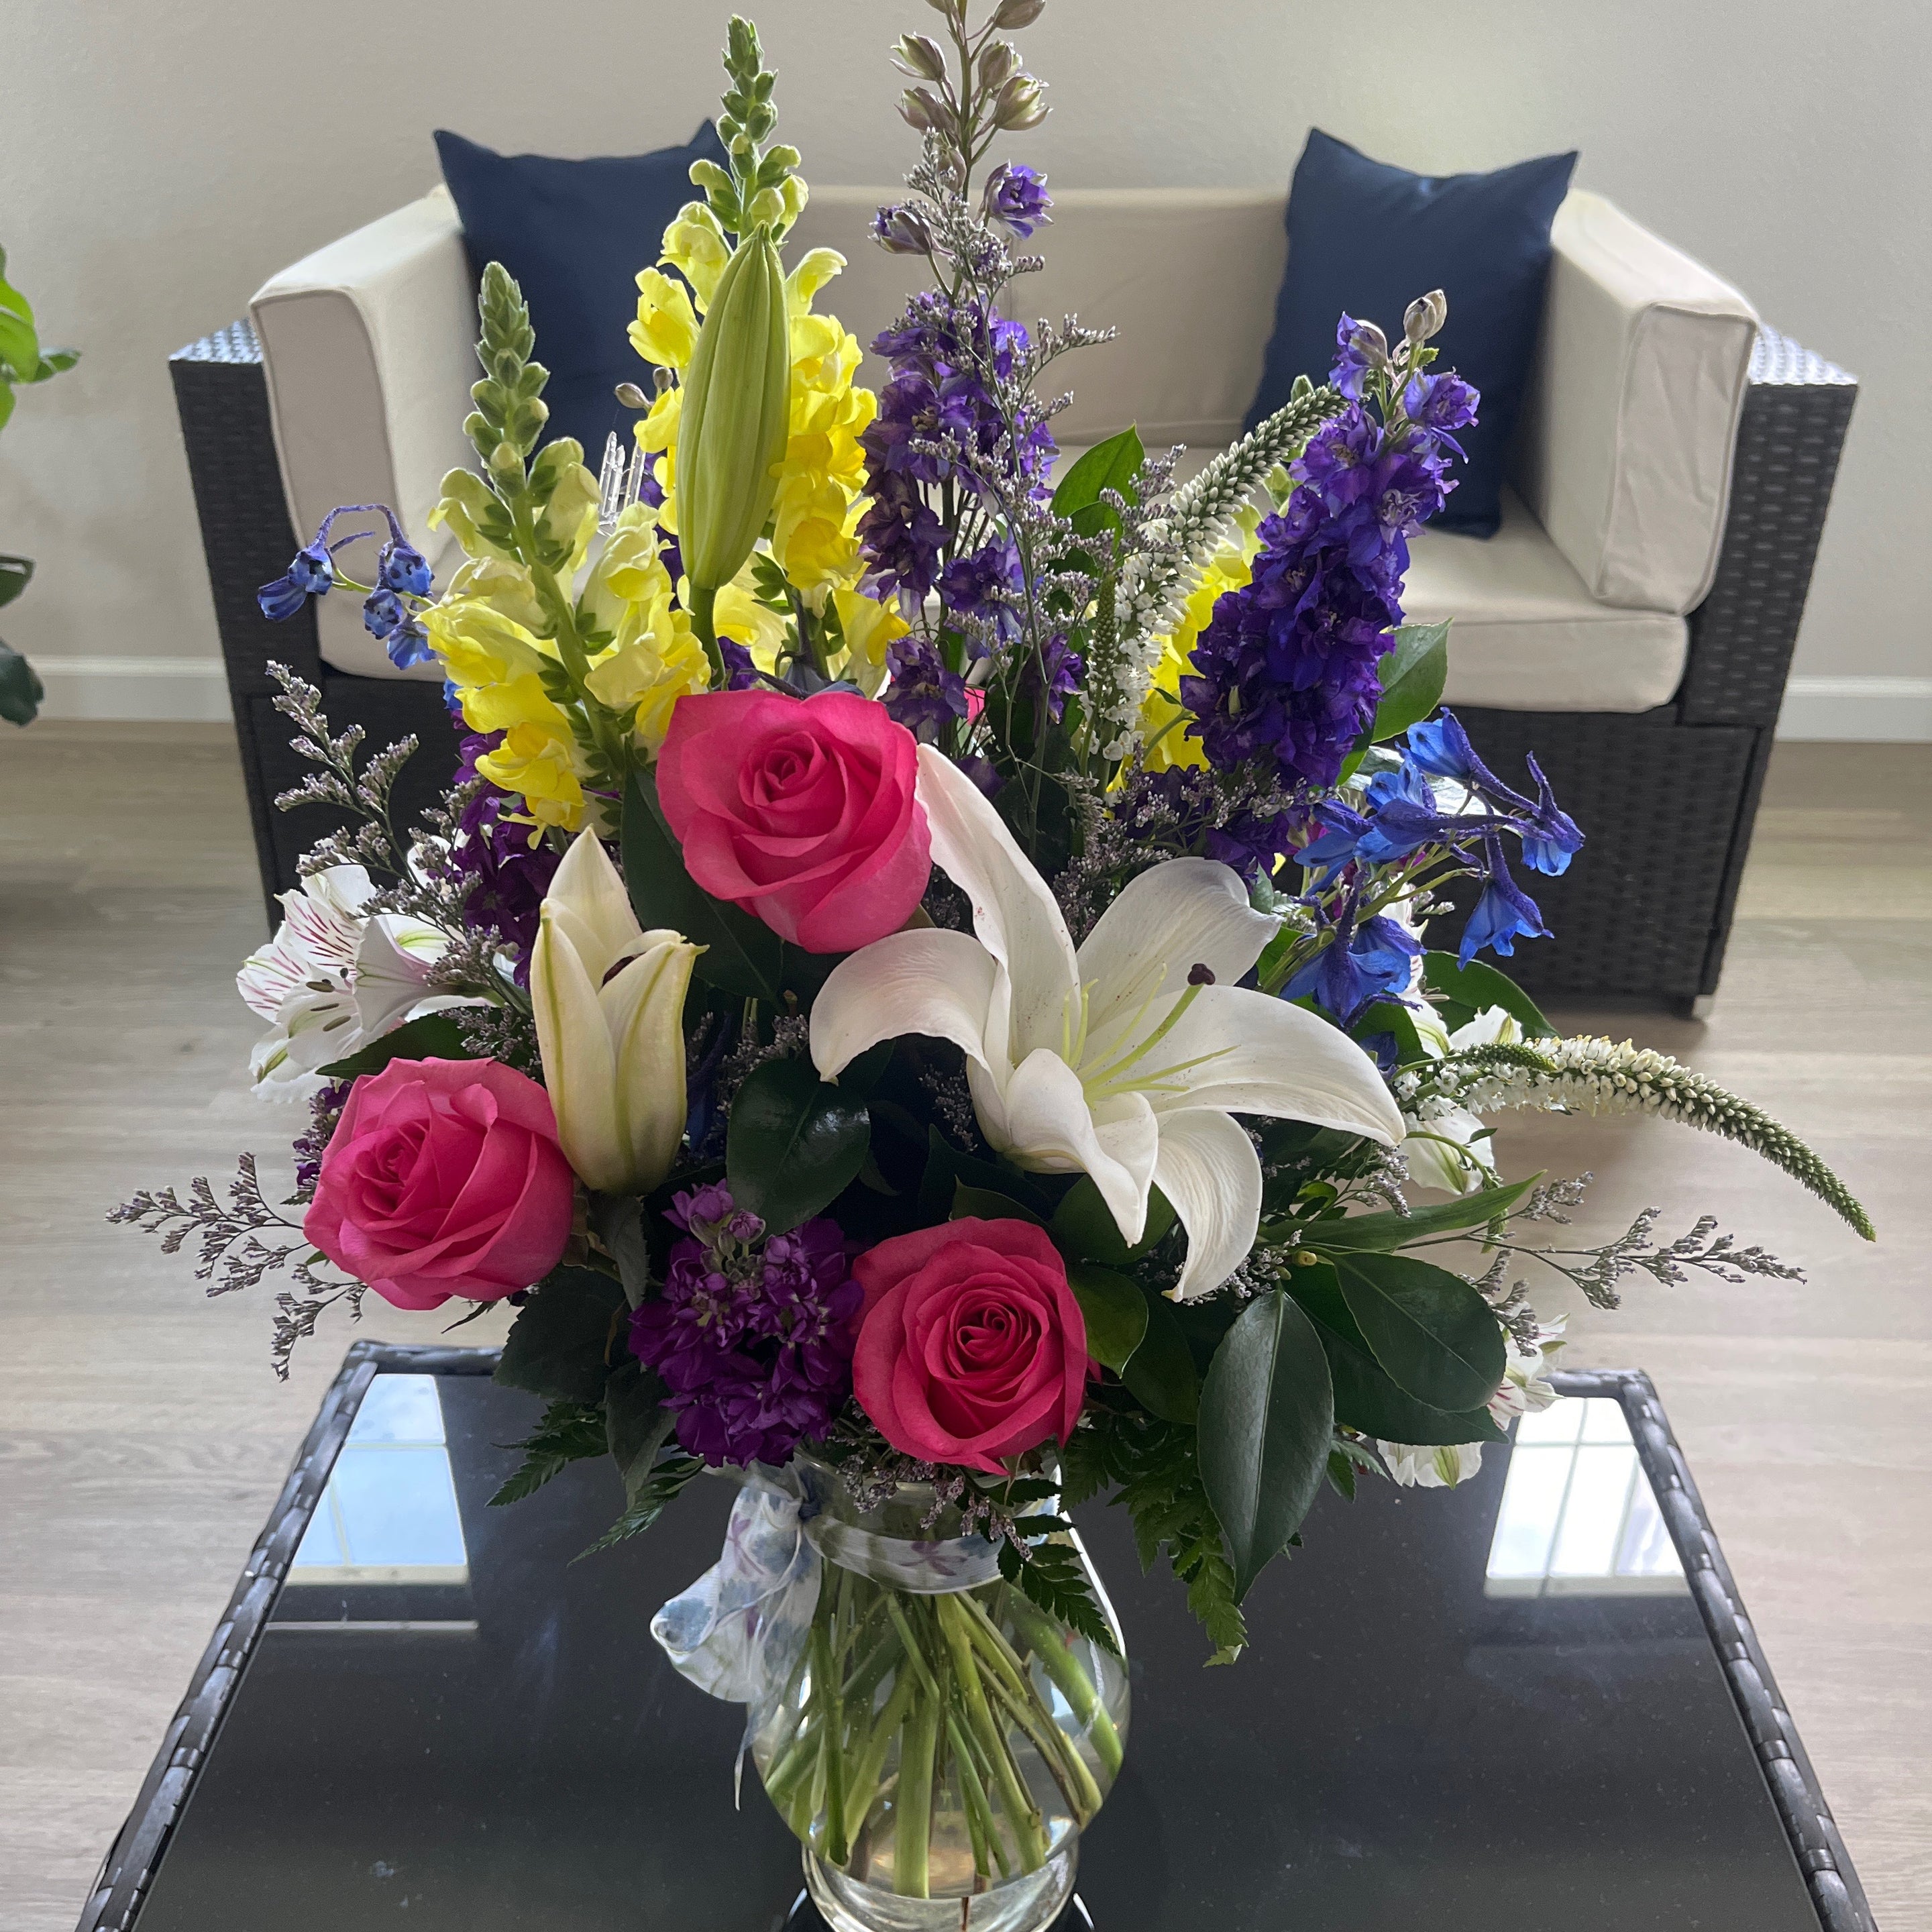 Grateful recipient shared this photo in appreciation for Florist's Choice Daily Deal